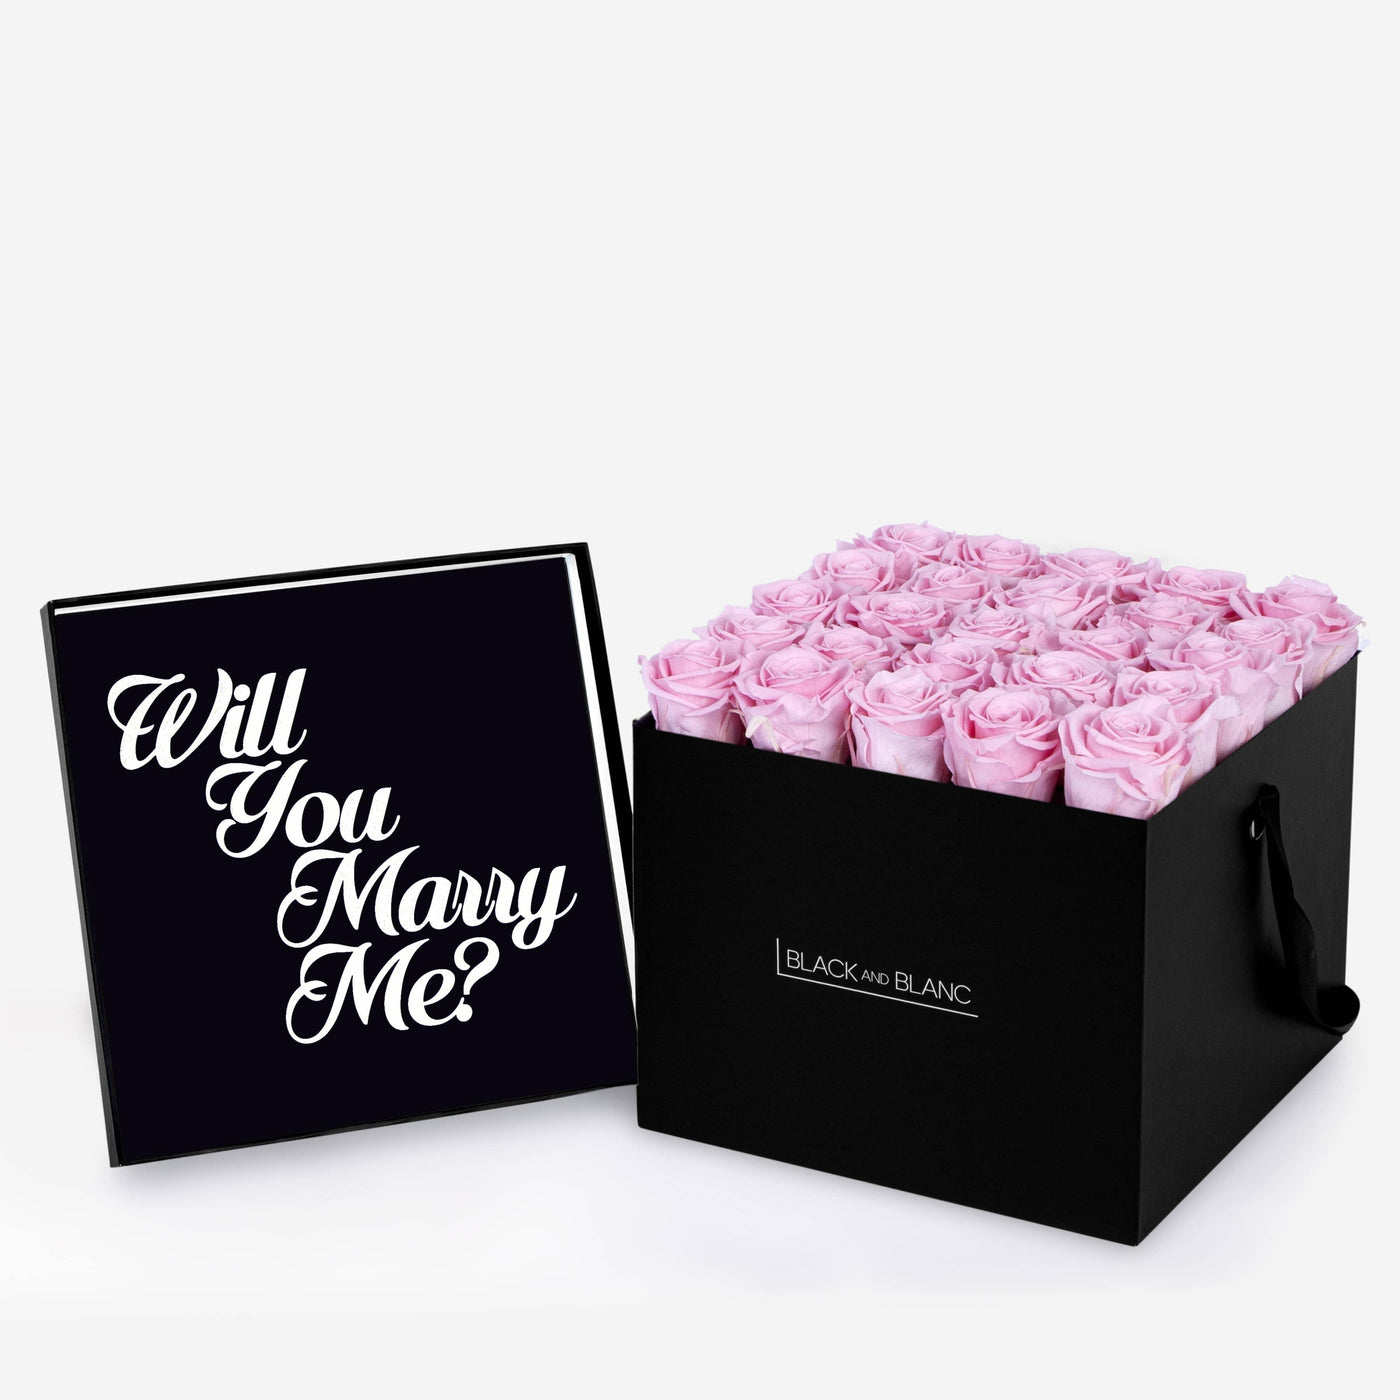 Infinity Texte de Fleur - Will You Marry Me? - BLACK AND BLANC